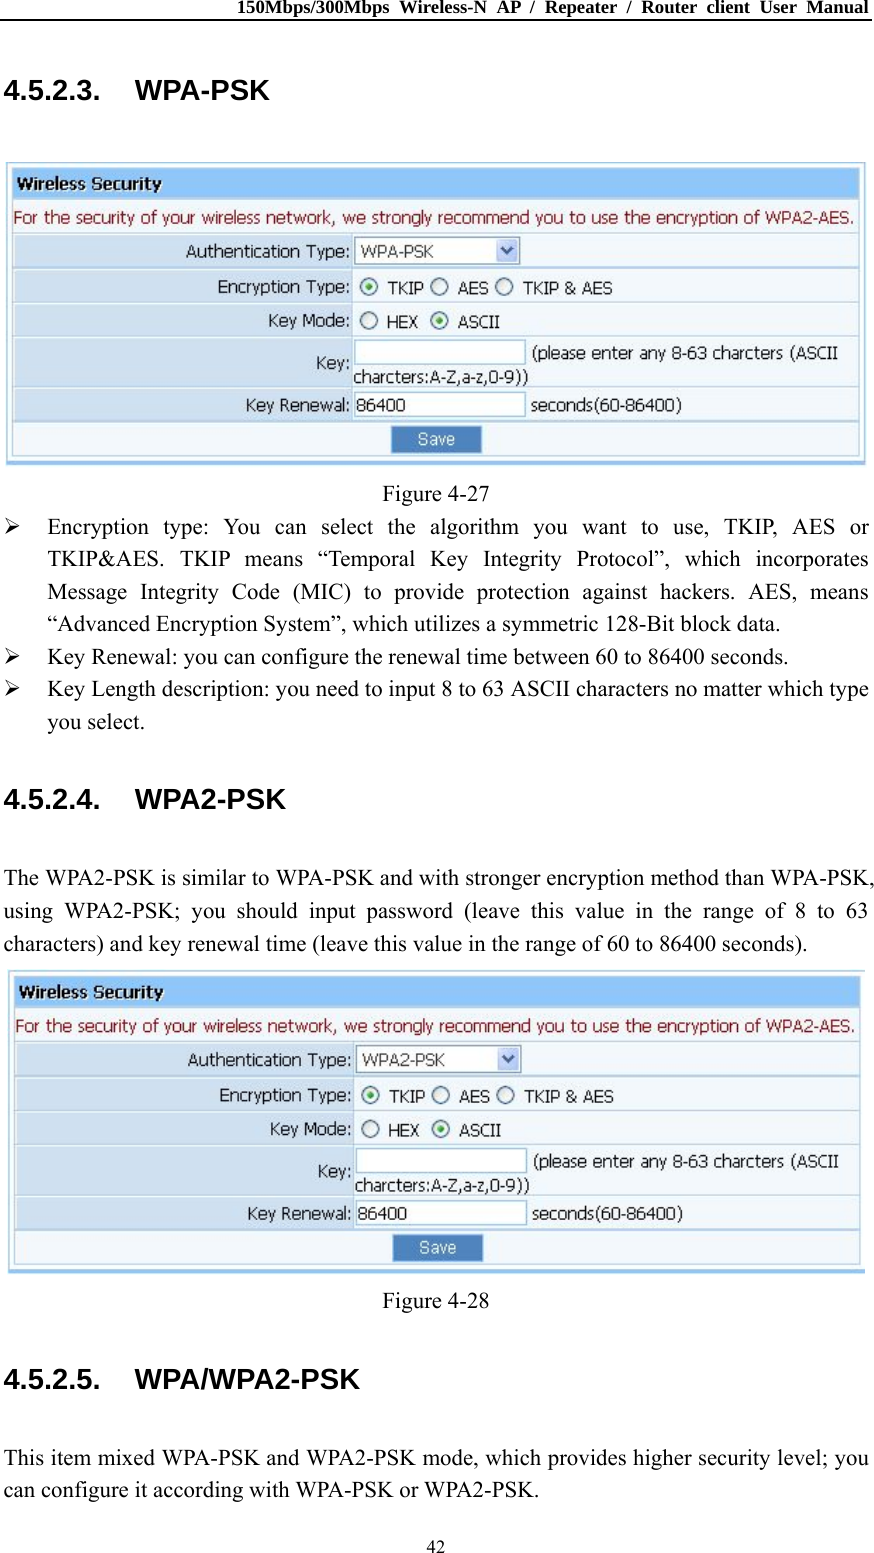 150Mbps/300Mbps Wireless-N AP / Repeater / Router client User Manual  424.5.2.3. WPA-PSK  Figure 4-27  Encryption type: You can select the algorithm you want to use, TKIP, AES or TKIP&amp;AES. TKIP means “Temporal Key Integrity Protocol”, which incorporates Message Integrity Code (MIC) to provide protection against hackers. AES, means “Advanced Encryption System”, which utilizes a symmetric 128-Bit block data.  Key Renewal: you can configure the renewal time between 60 to 86400 seconds.  Key Length description: you need to input 8 to 63 ASCII characters no matter which type you select. 4.5.2.4. WPA2-PSK The WPA2-PSK is similar to WPA-PSK and with stronger encryption method than WPA-PSK, using WPA2-PSK; you should input password (leave this value in the range of 8 to 63 characters) and key renewal time (leave this value in the range of 60 to 86400 seconds).  Figure 4-28 4.5.2.5. WPA/WPA2-PSK This item mixed WPA-PSK and WPA2-PSK mode, which provides higher security level; you can configure it according with WPA-PSK or WPA2-PSK. 